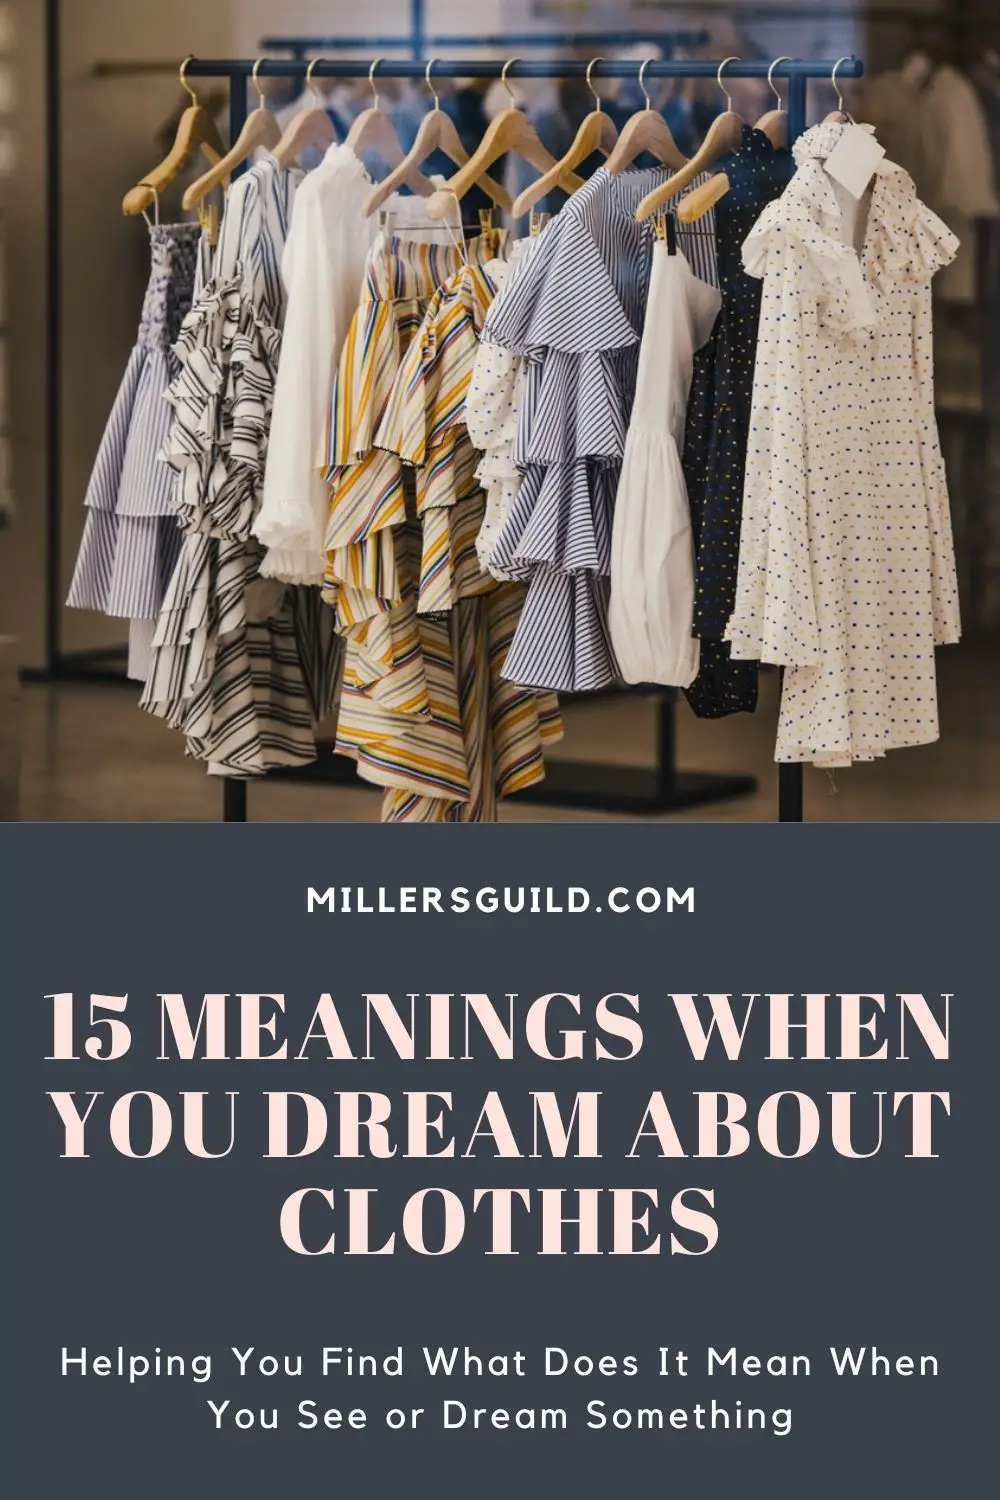 What Does Shopping For Clothes In Dreams Represent?